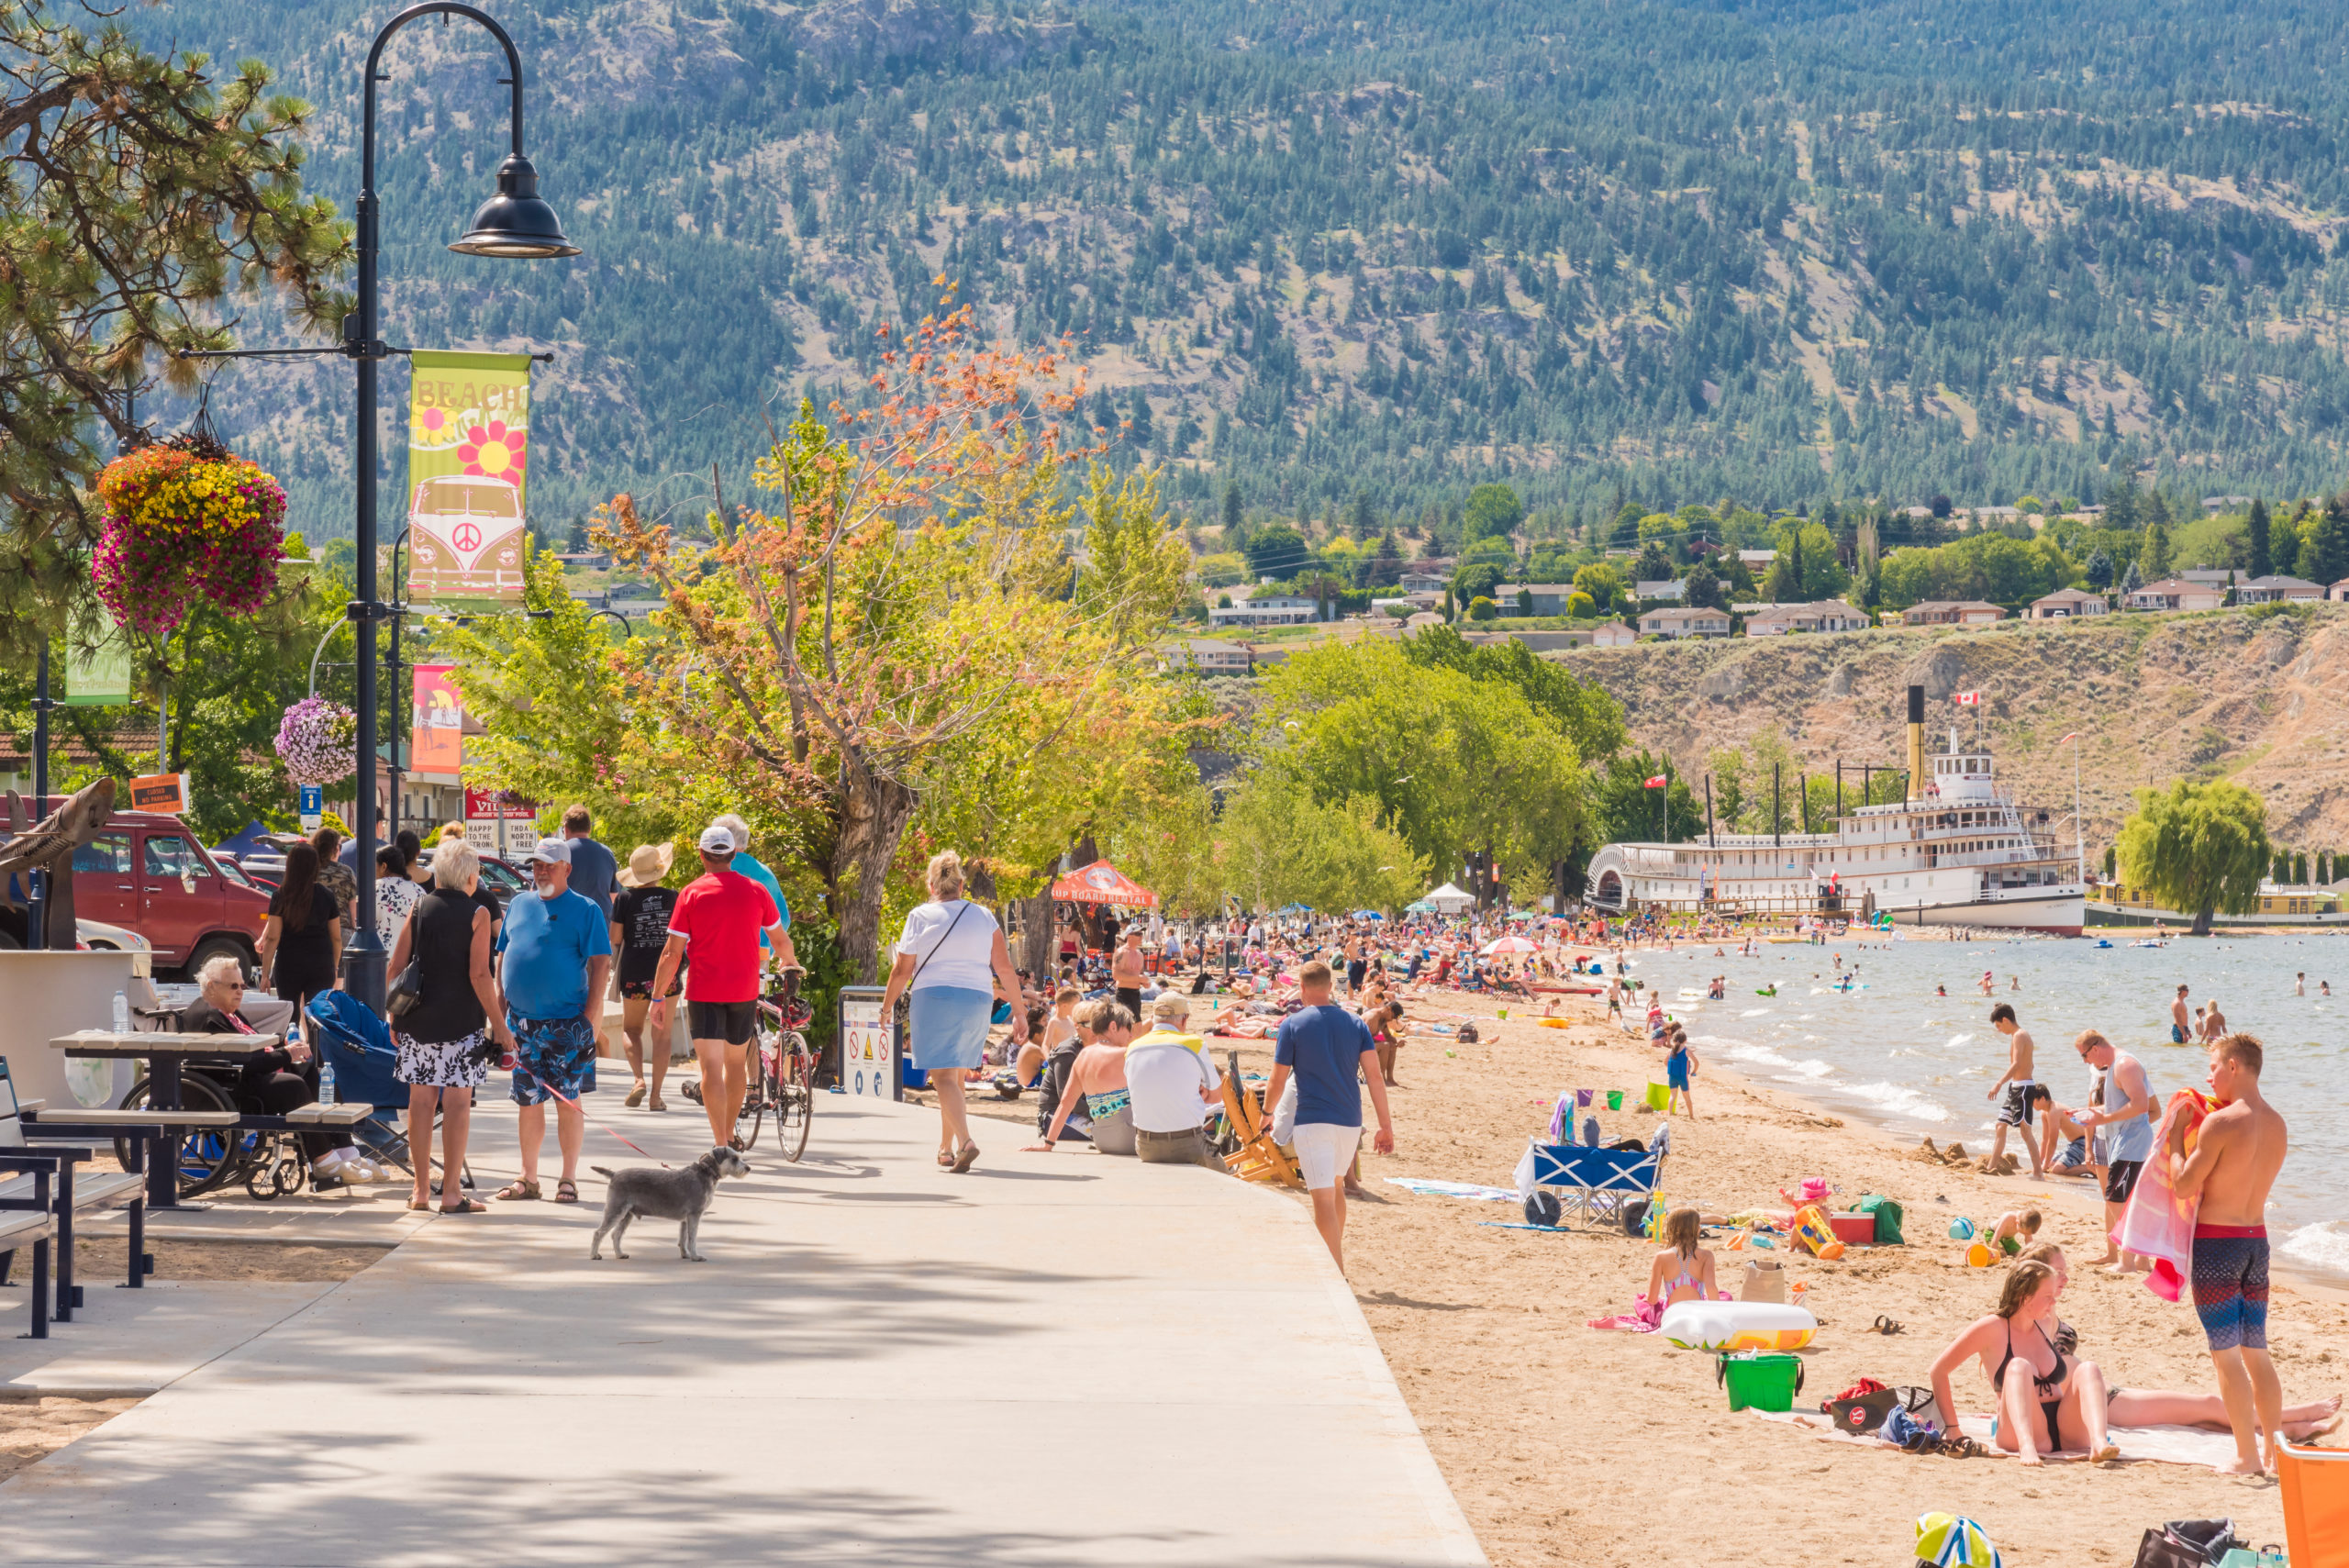 Nightclubs & bars closed, limit on gatherings in Central Okanagan